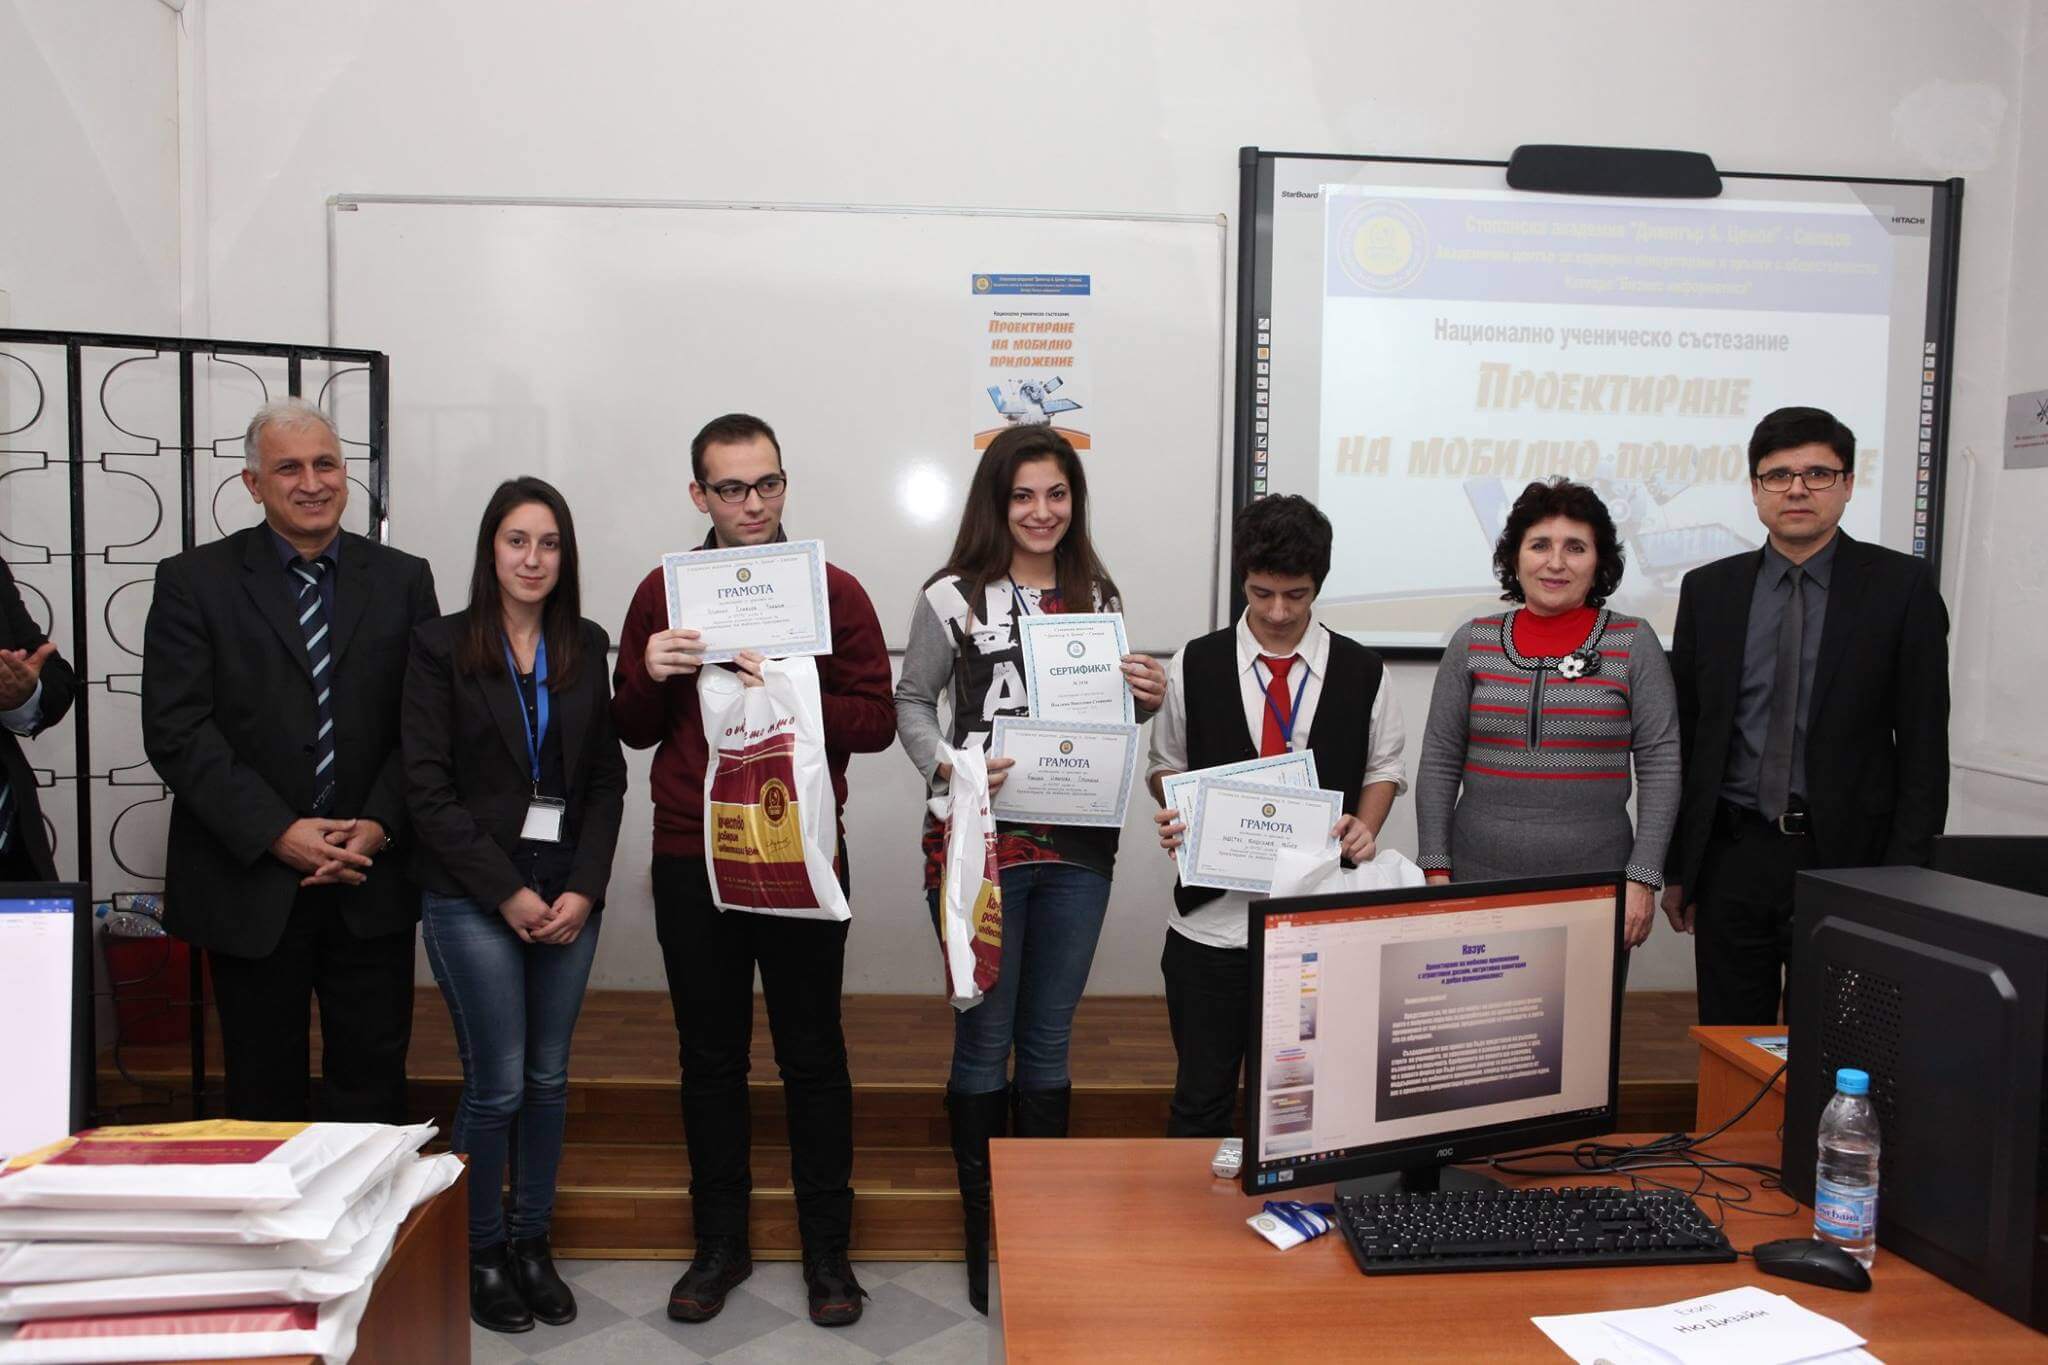 National student competitions in four directions in the town of Svishtov